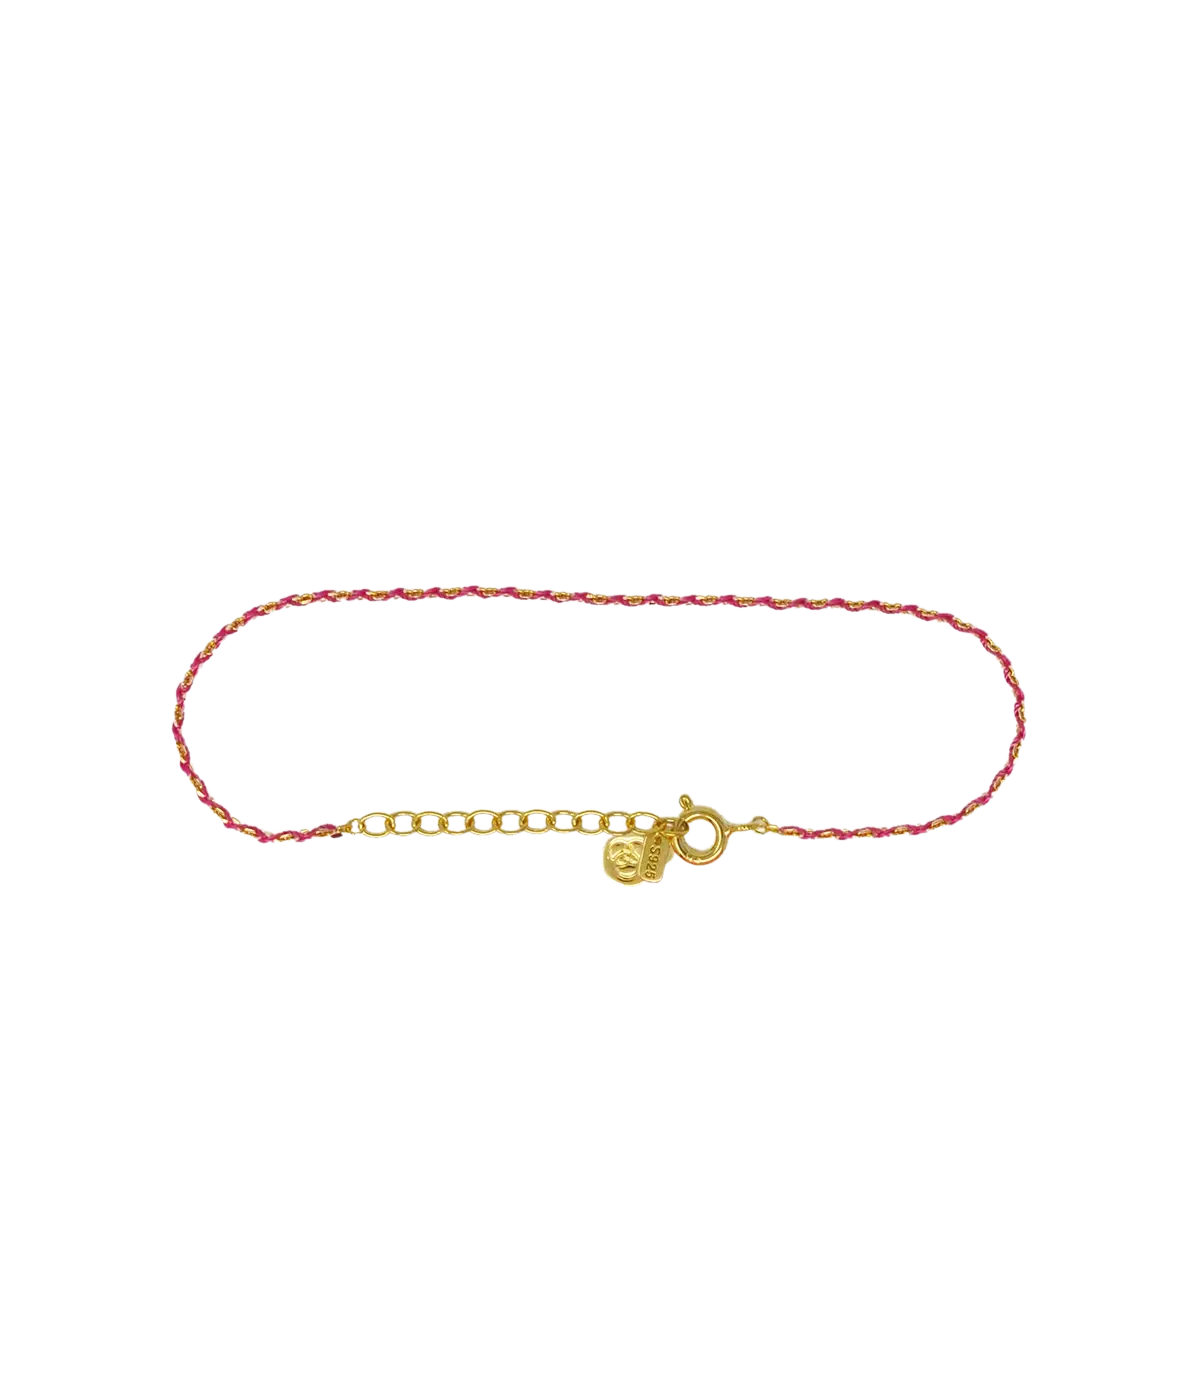 Rook Bracelet in 14K Yellow Gold & Pink